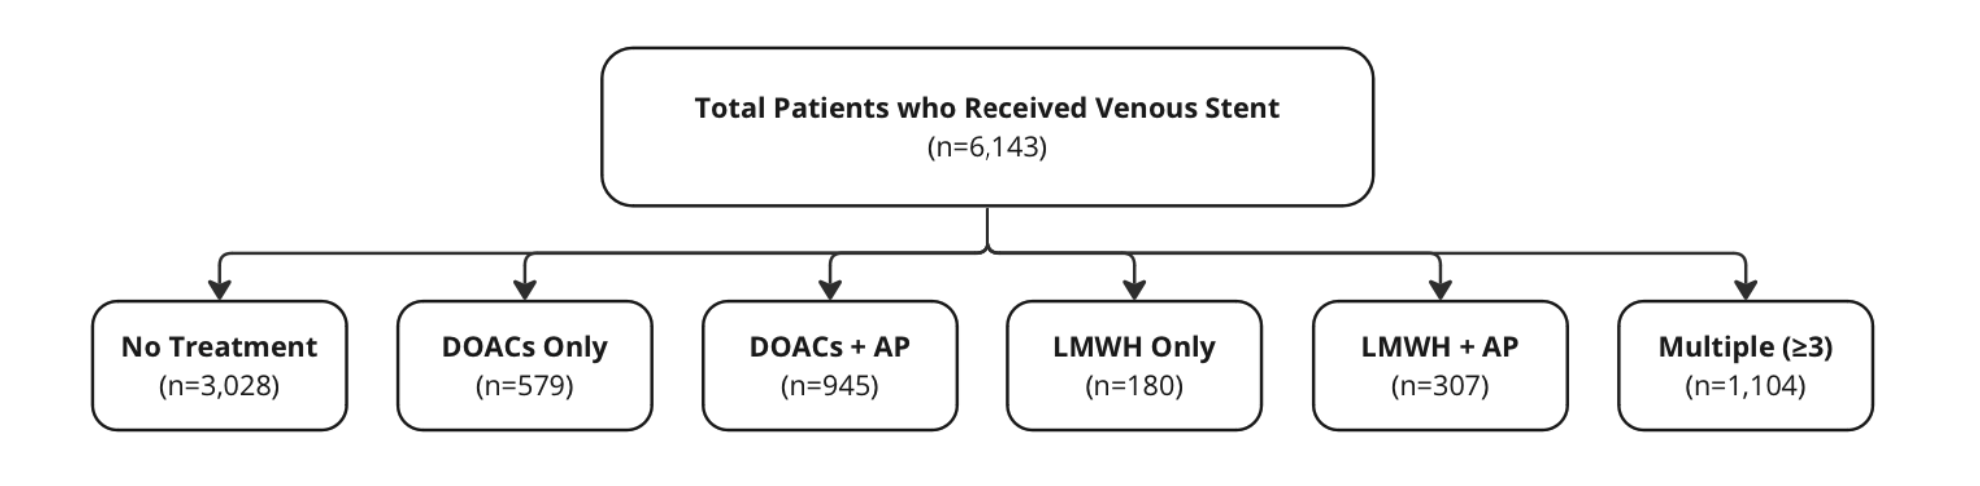 Total patients who received a venous stent